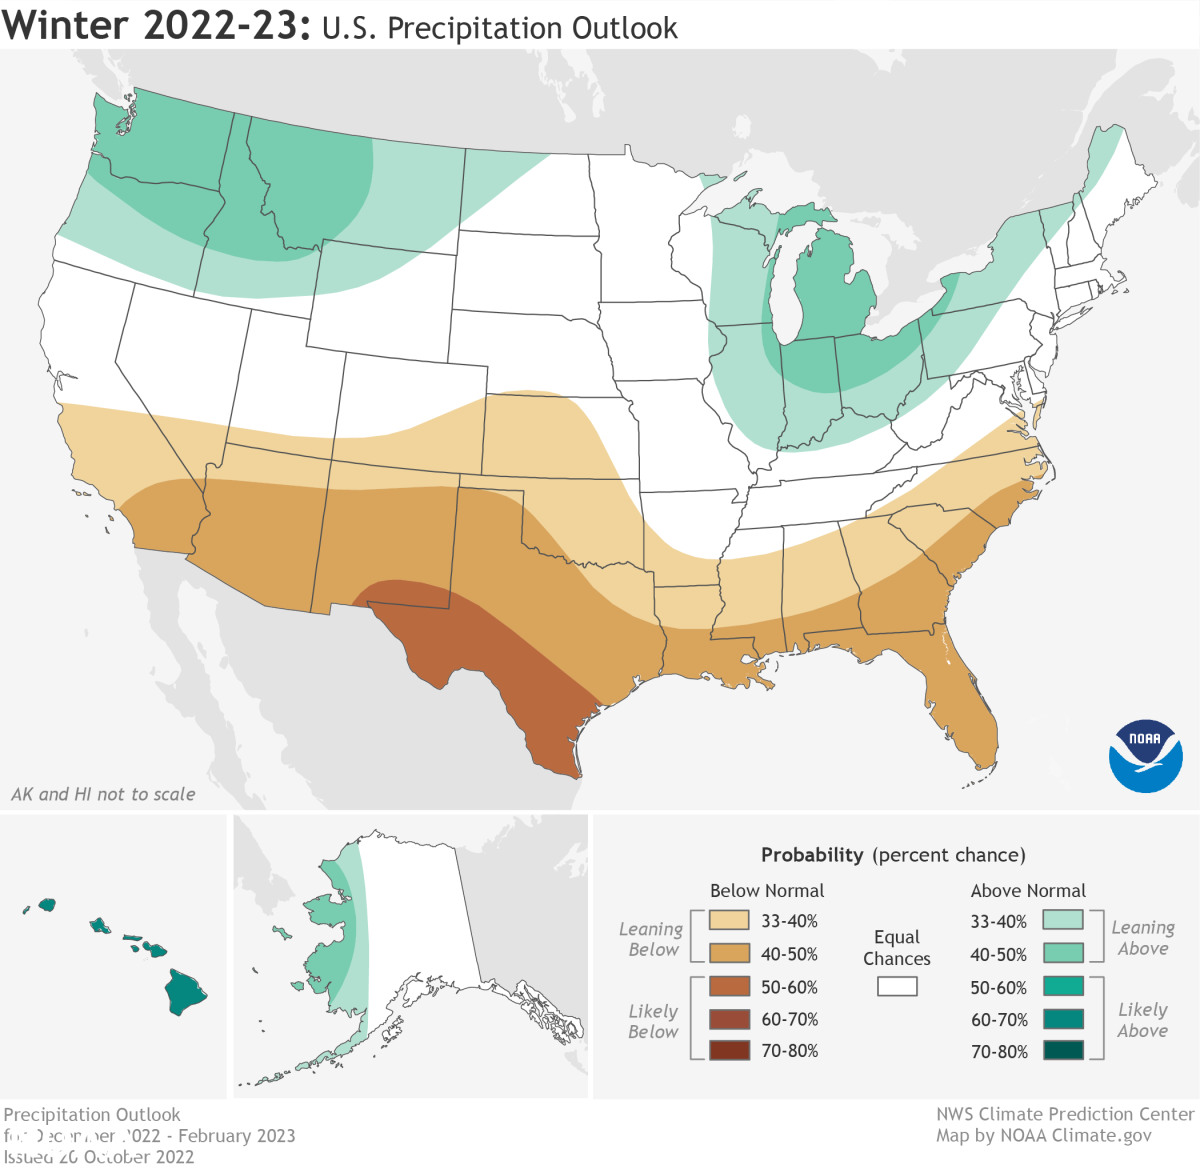 This October outlook for December-February has changed